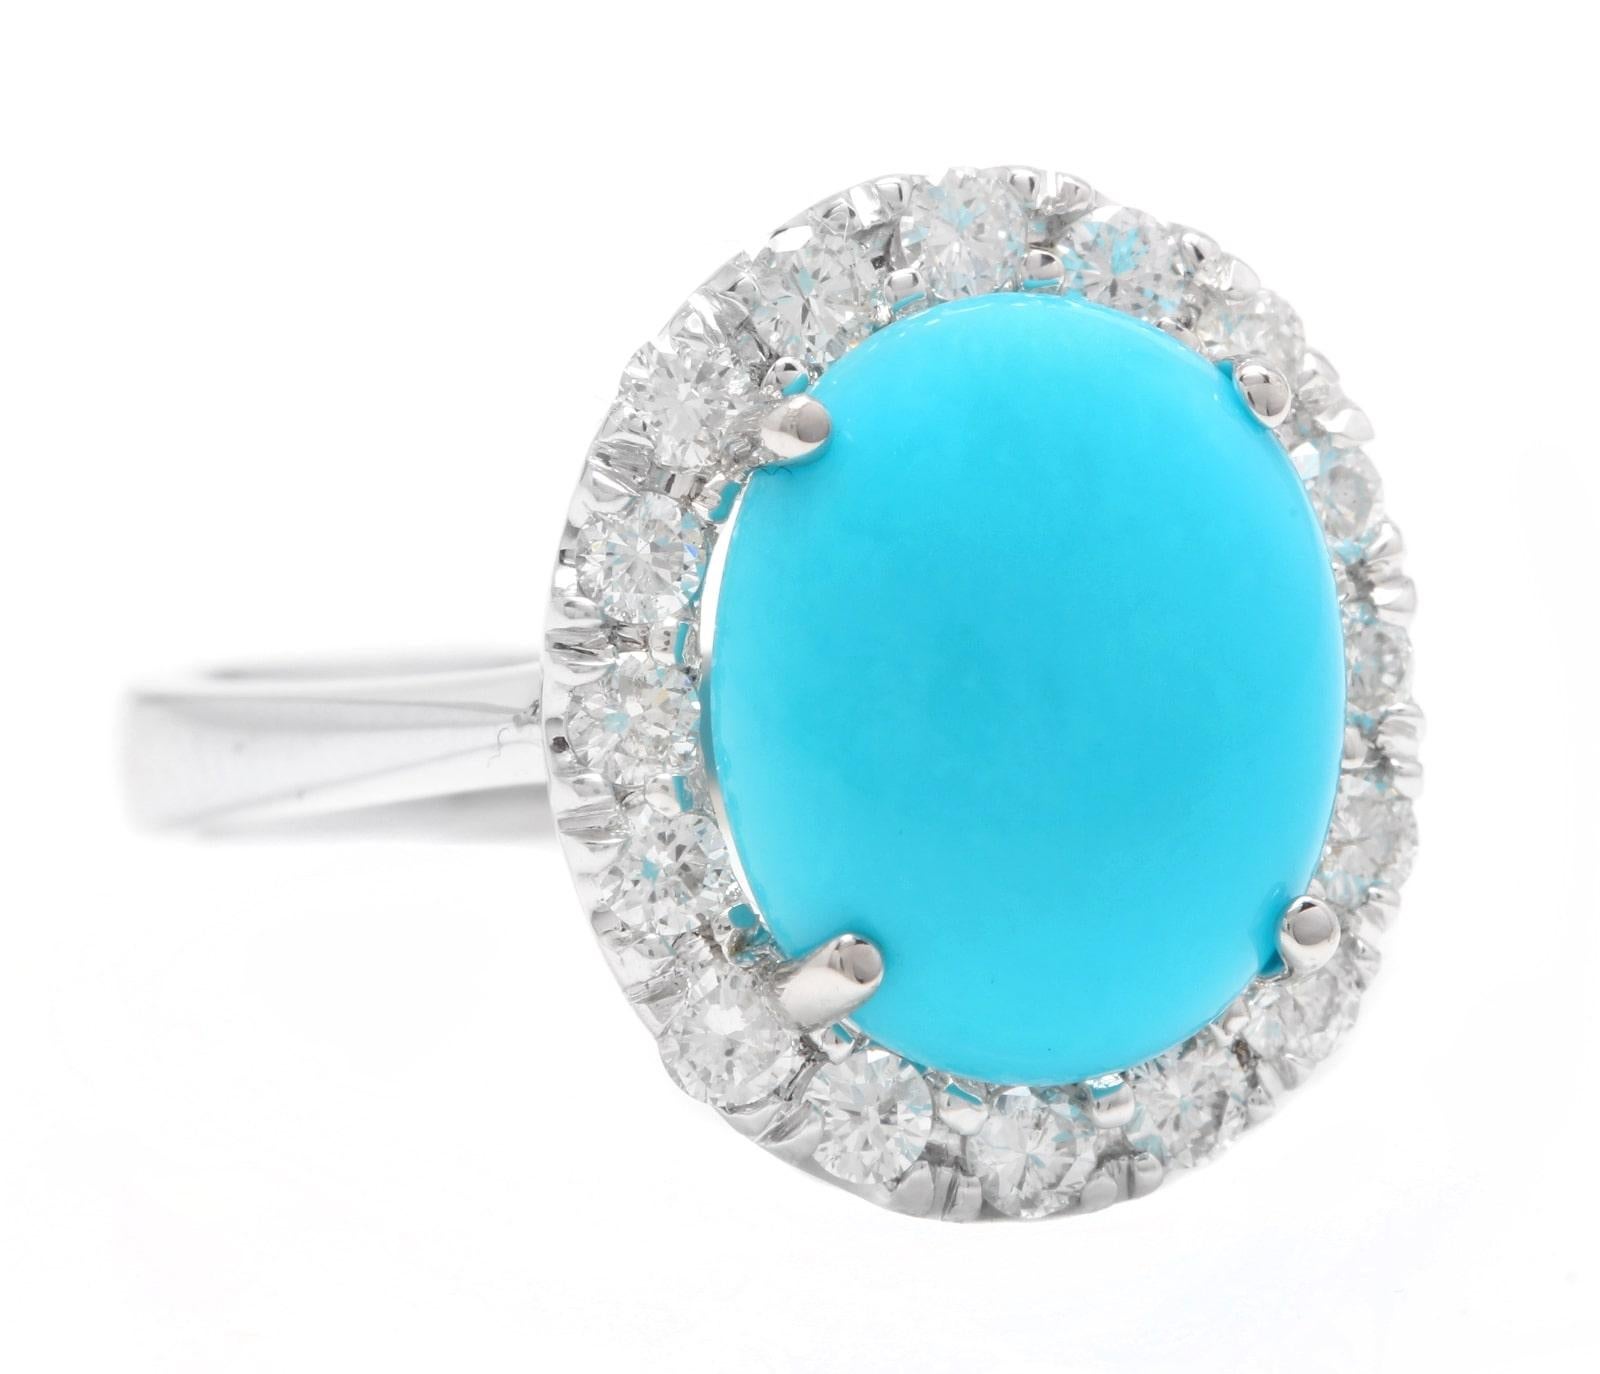 7.65 Carats Impressive Natural Turquoise and Diamond 18K White Gold Ring

Suggested Replacement Value $6,000.00

Total Natural Oval Turquoise Weight is: Approx. 7.00 Carats 

Turquoise Measures: 12.00 x 10.00mm 

Natural Round Diamonds Weight: